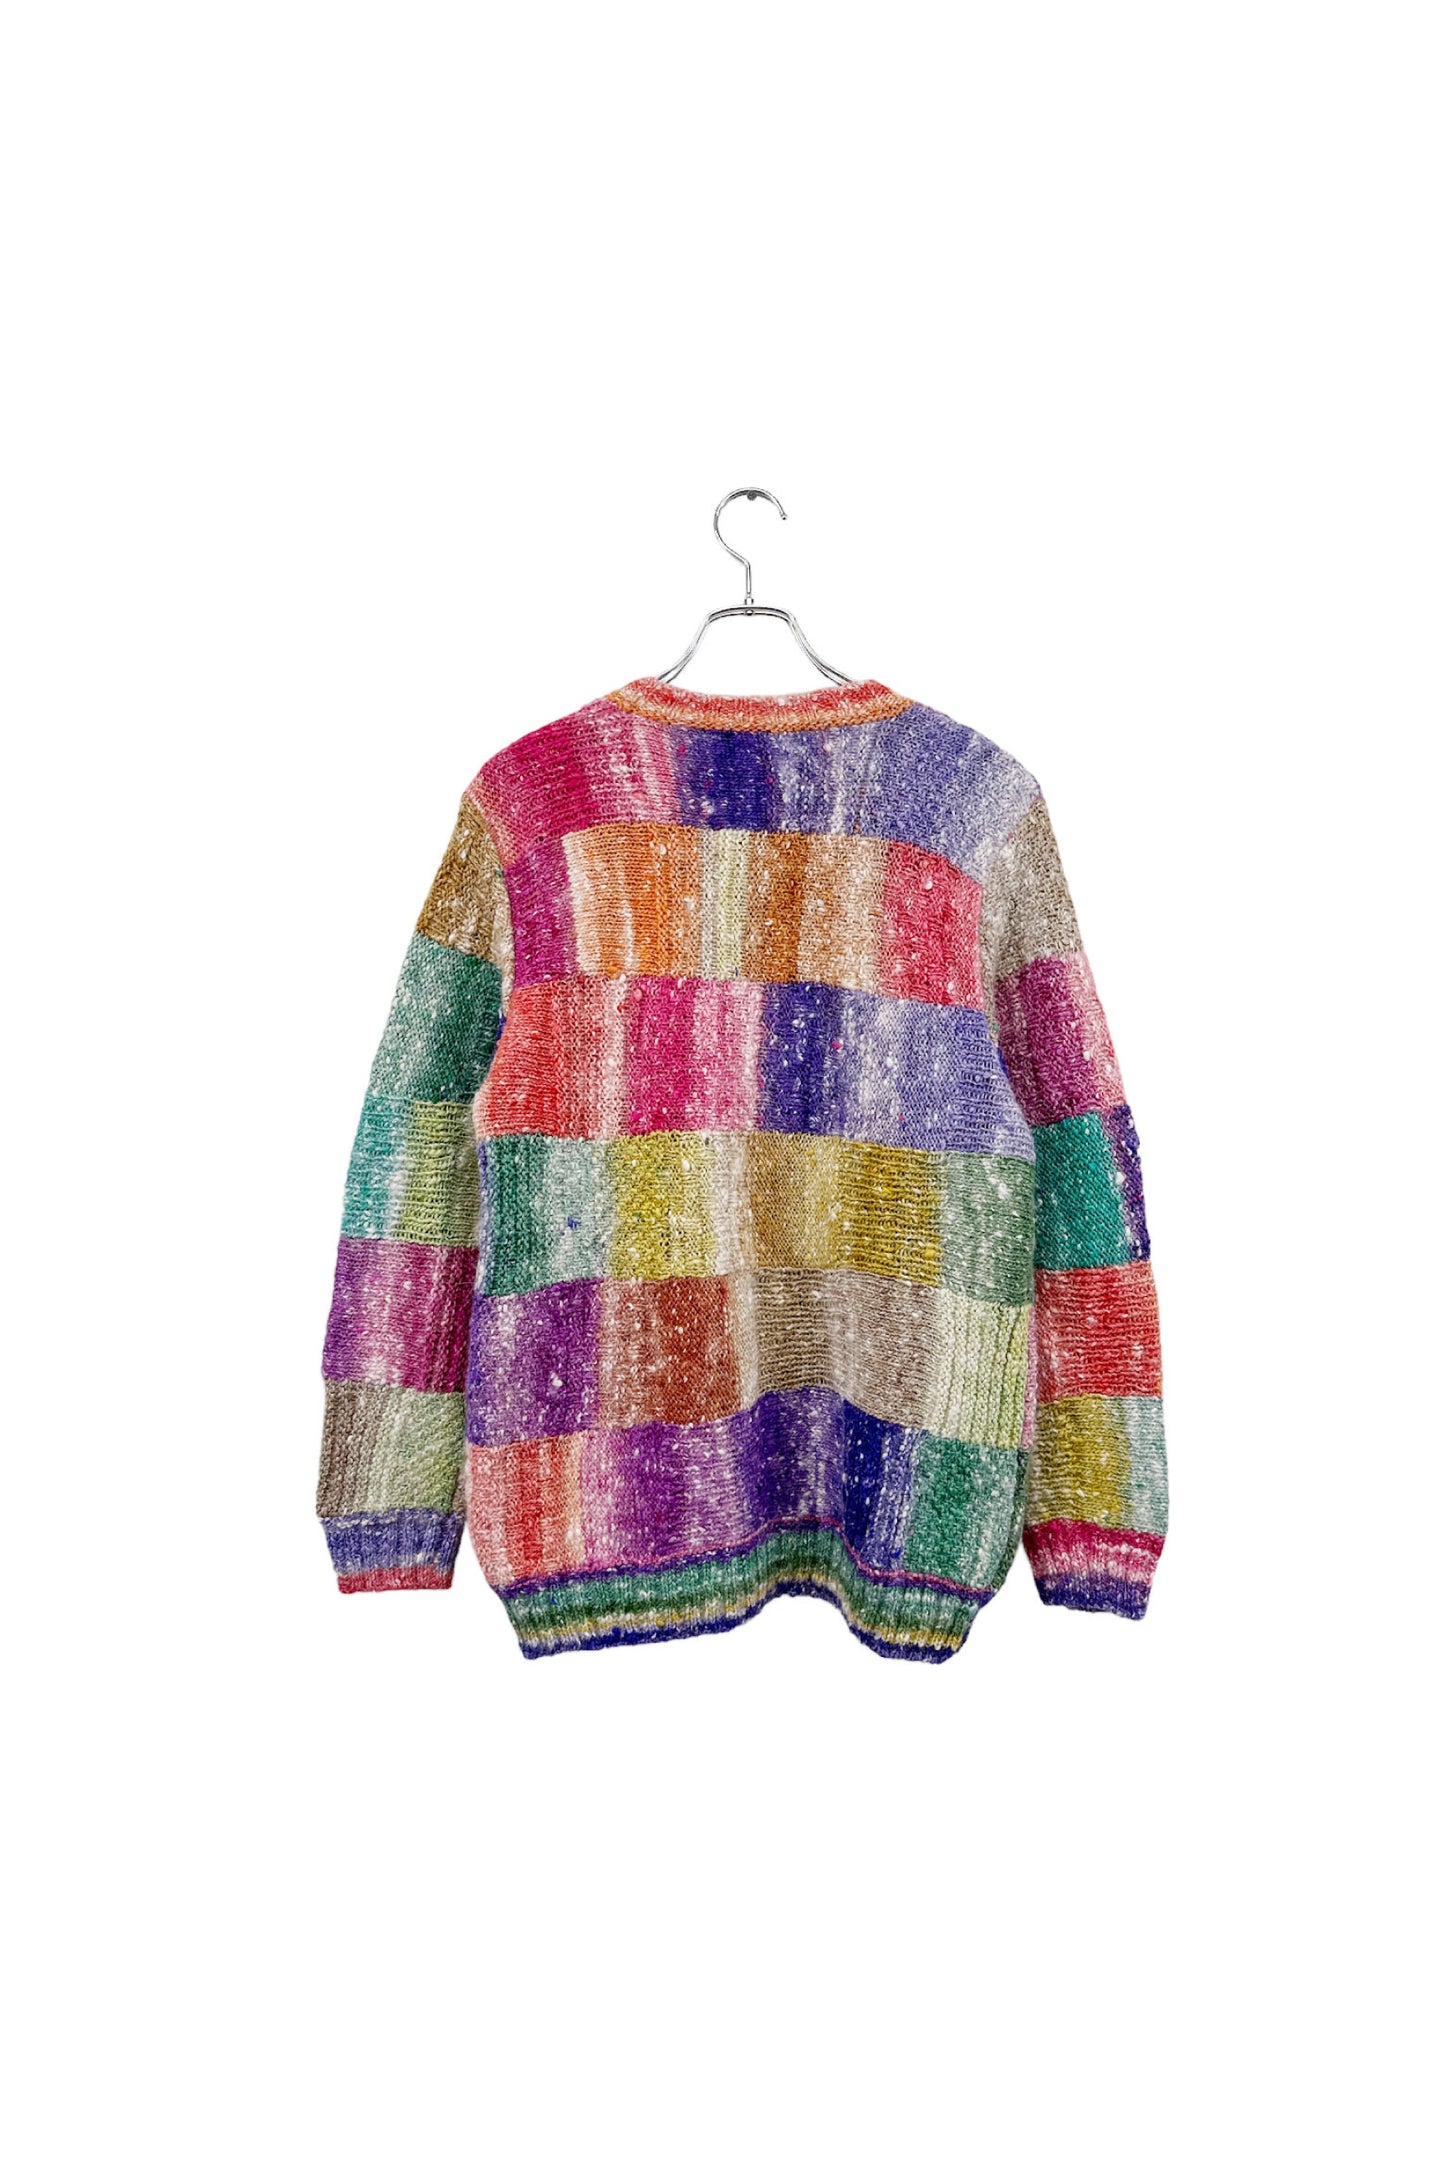 NORO hand knit patchwork cardigan